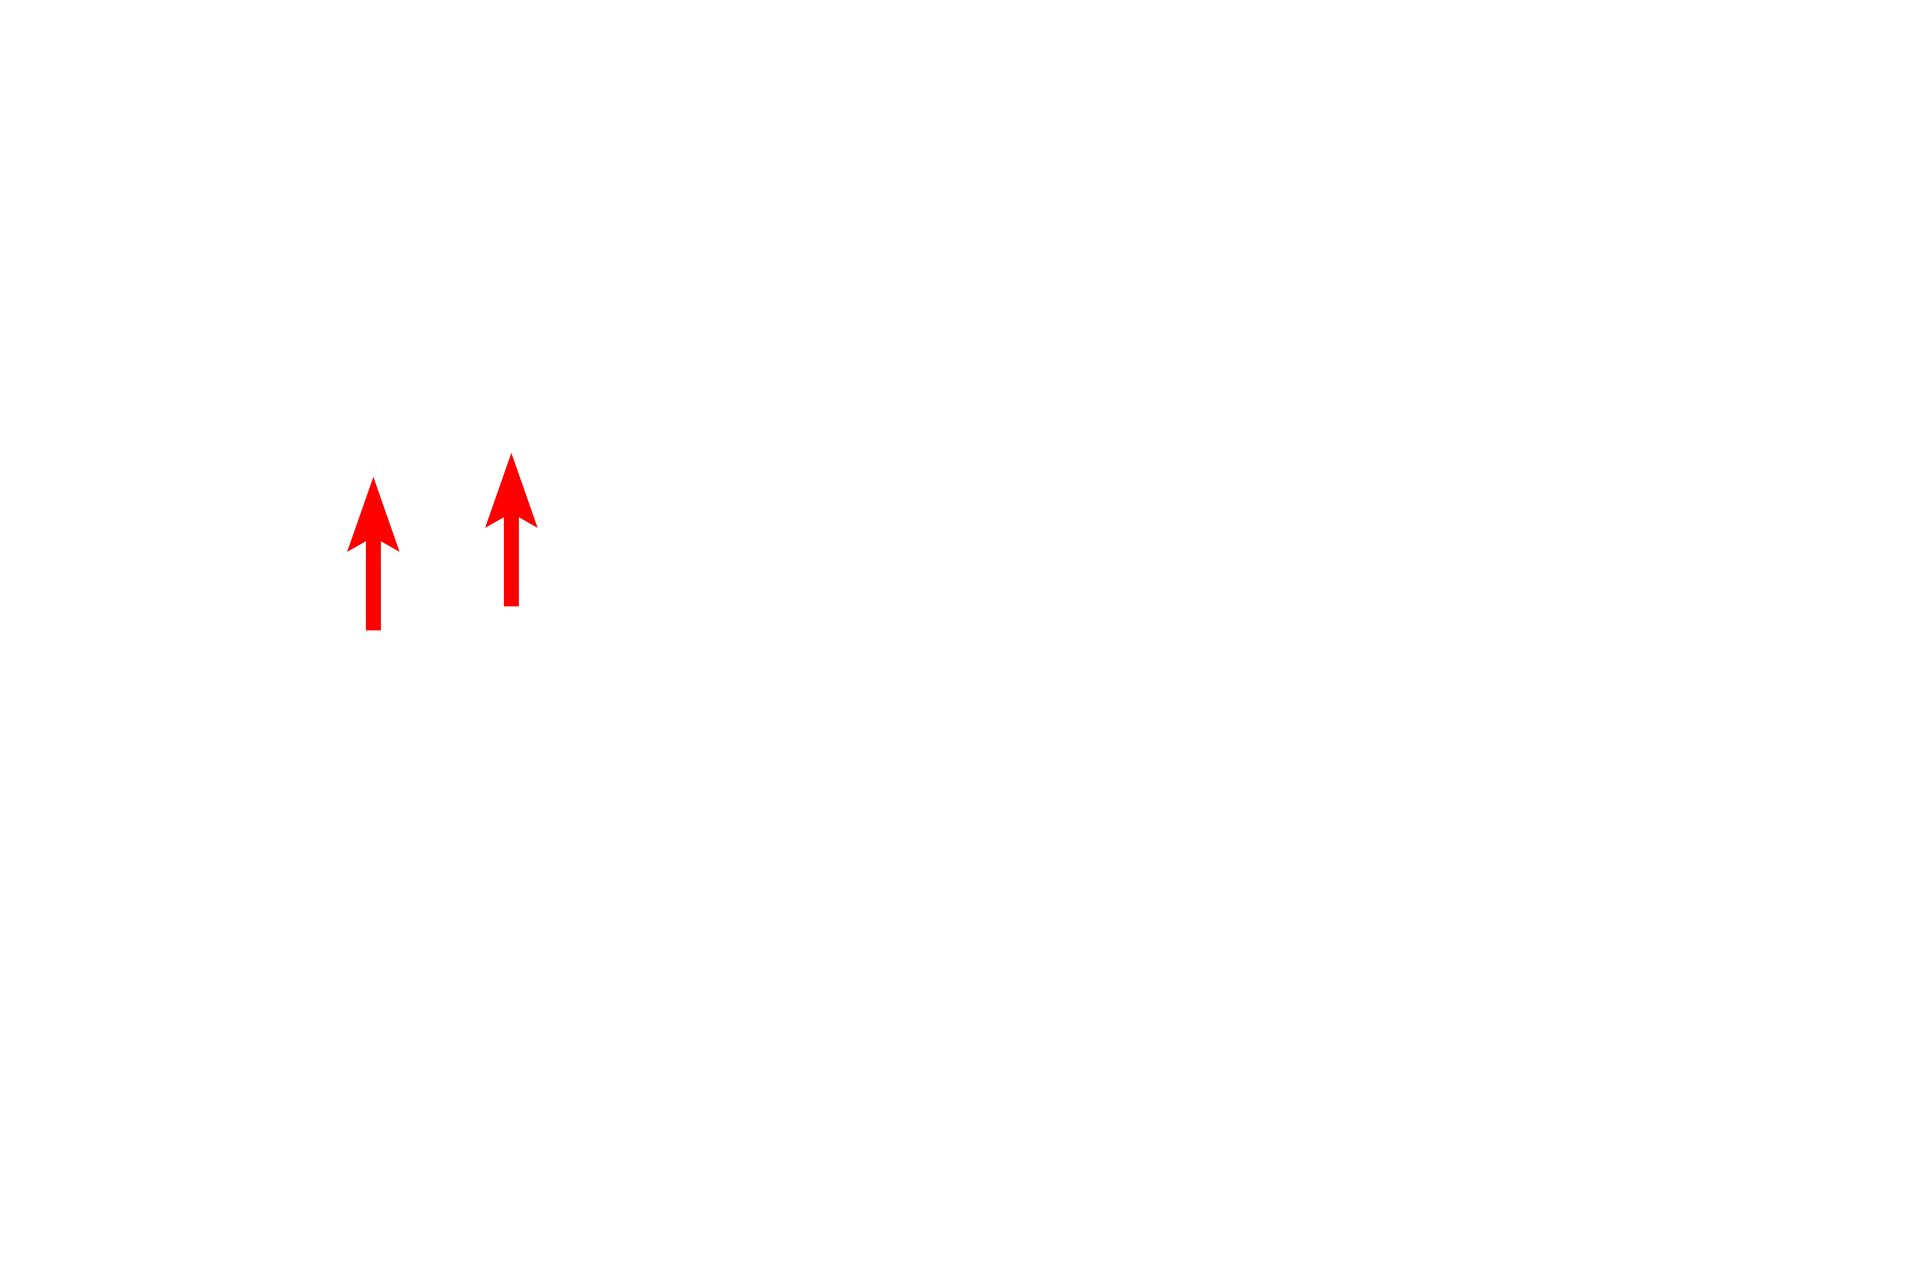 Vesicles, secretory granules <p>Proteins for export and membrane insertion are synthesized by the RER and transferred to the Golgi via transport vesicles.  Transport vesicles fuse with the cis or forming face of the Golgi.  The proteins from the vesicles are post-translationally modified while moving toward the trans or maturing face. There, they are packaged into vesicles and secretory granules for transport to the plasma membrane.</p>
